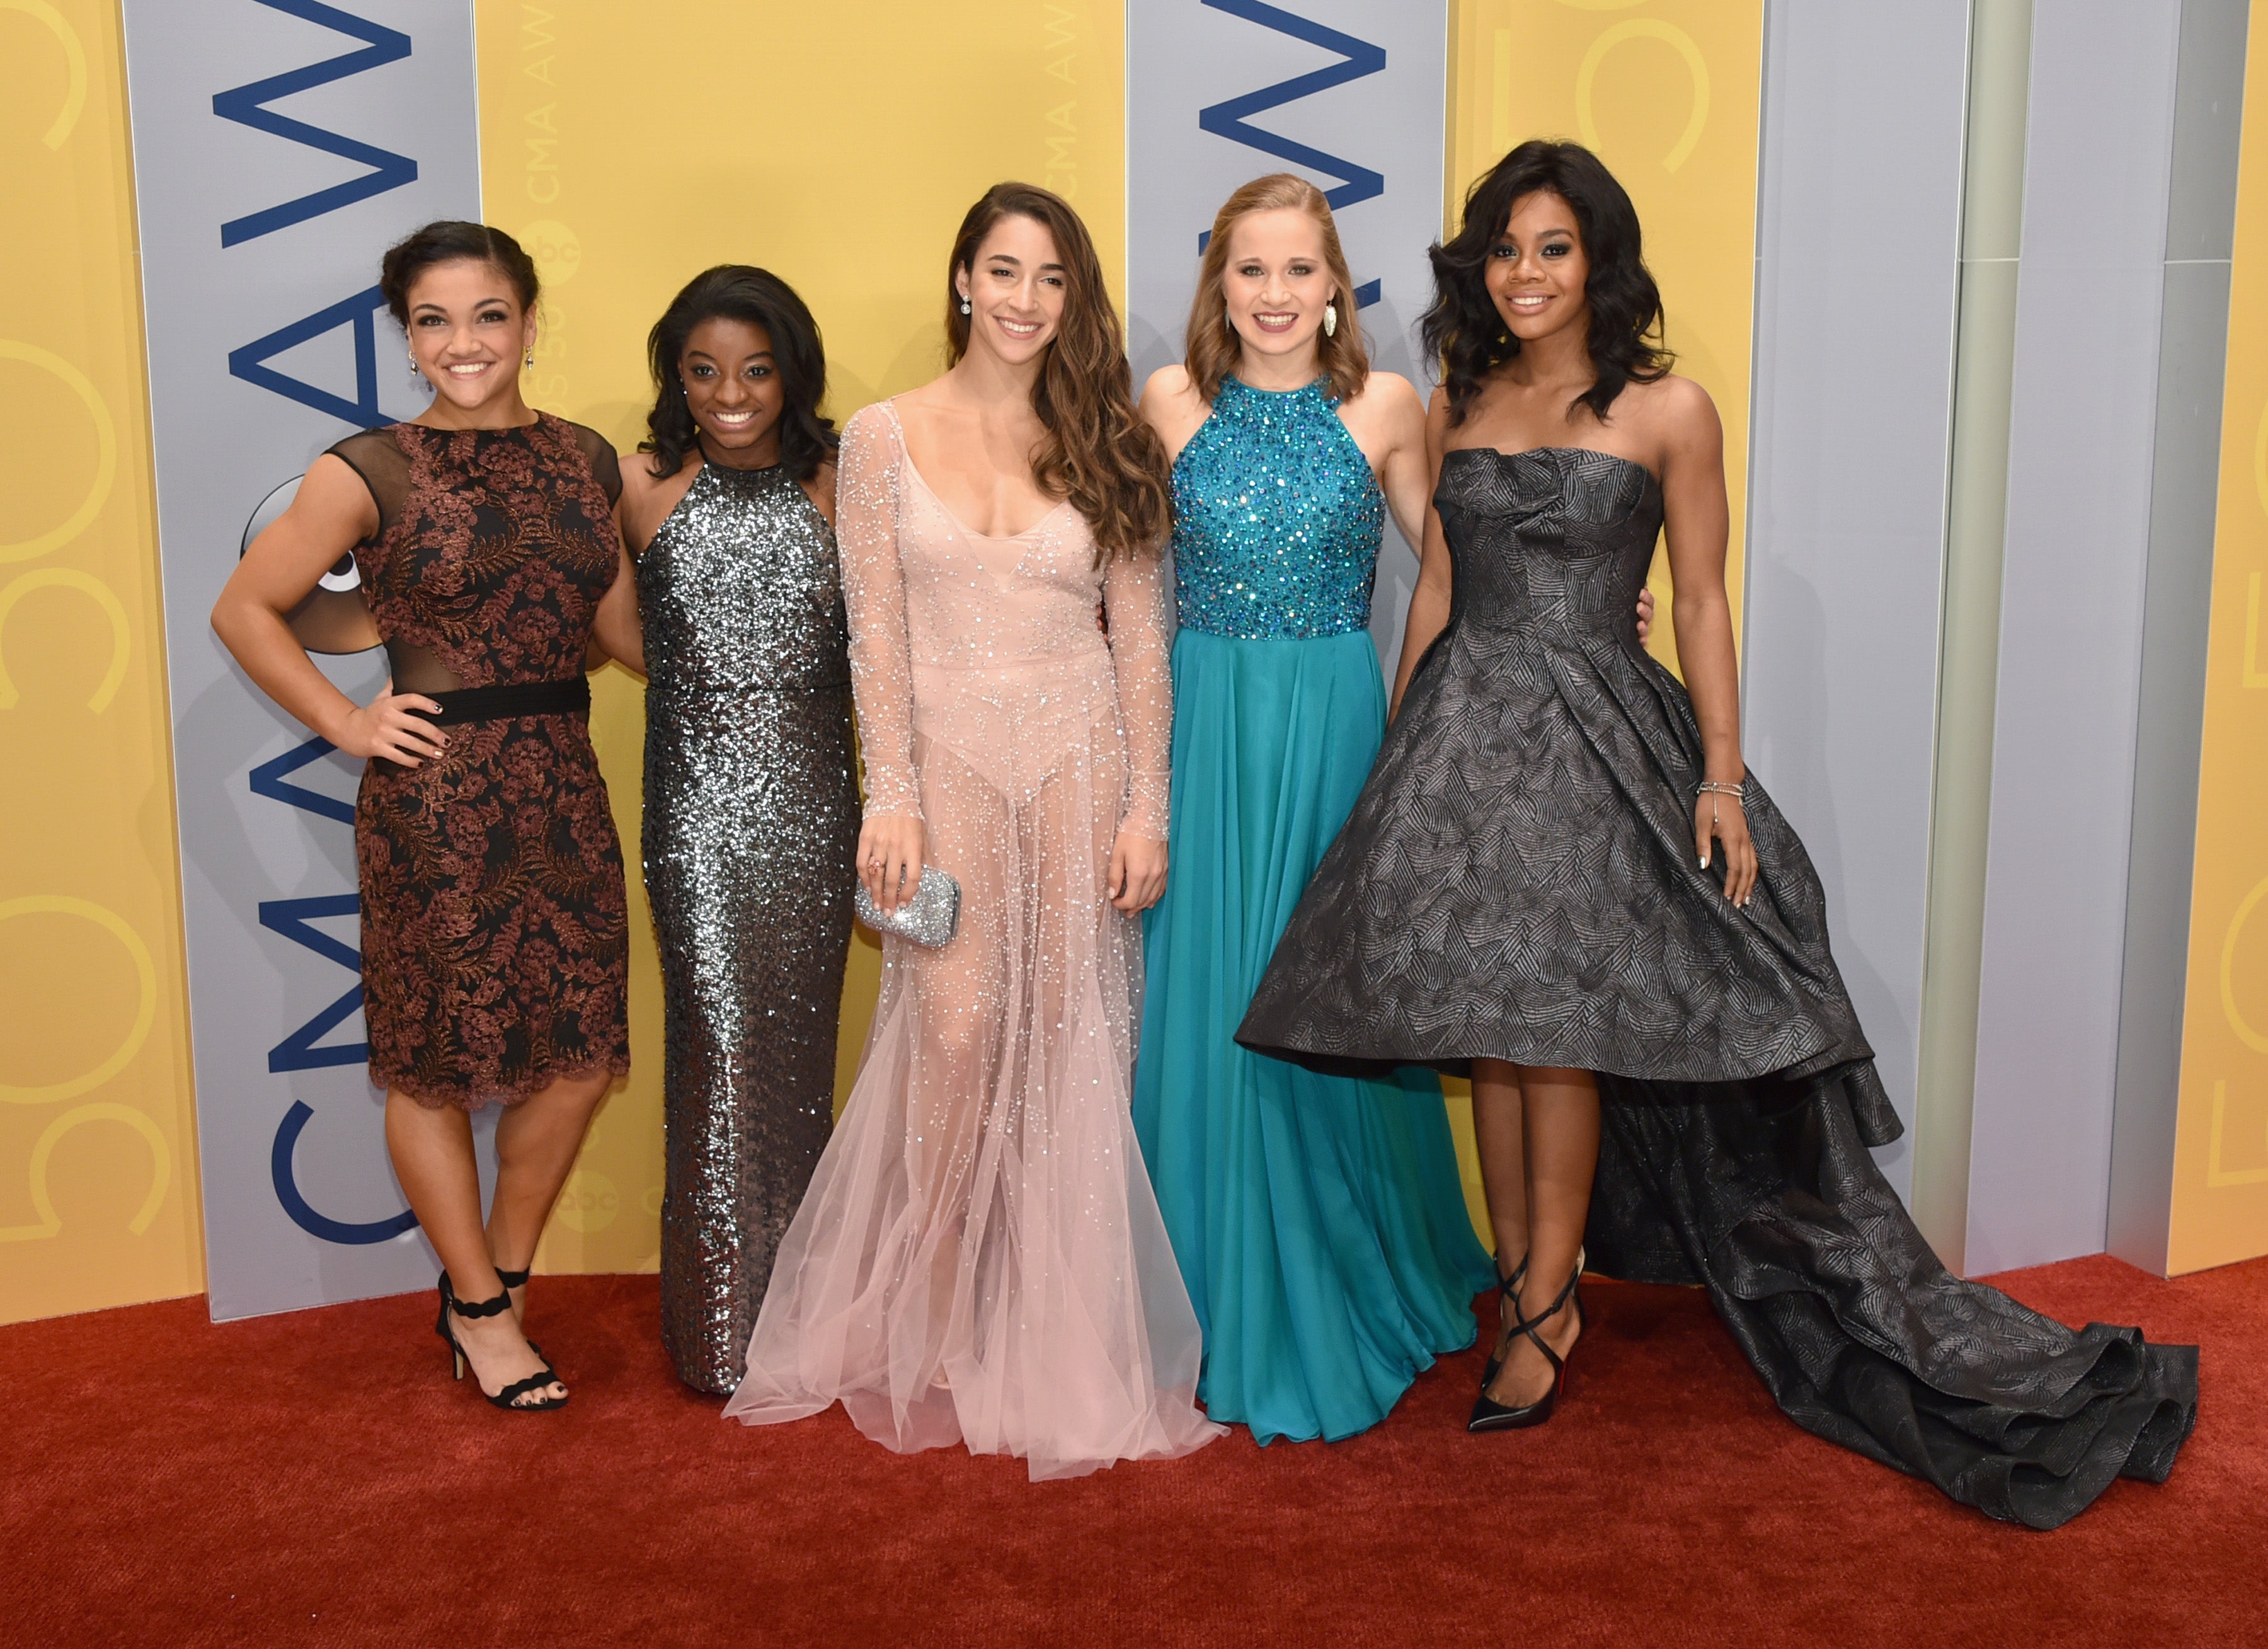 Final Five Attend the CMA Awards: 'We're Just Taking it All In'
